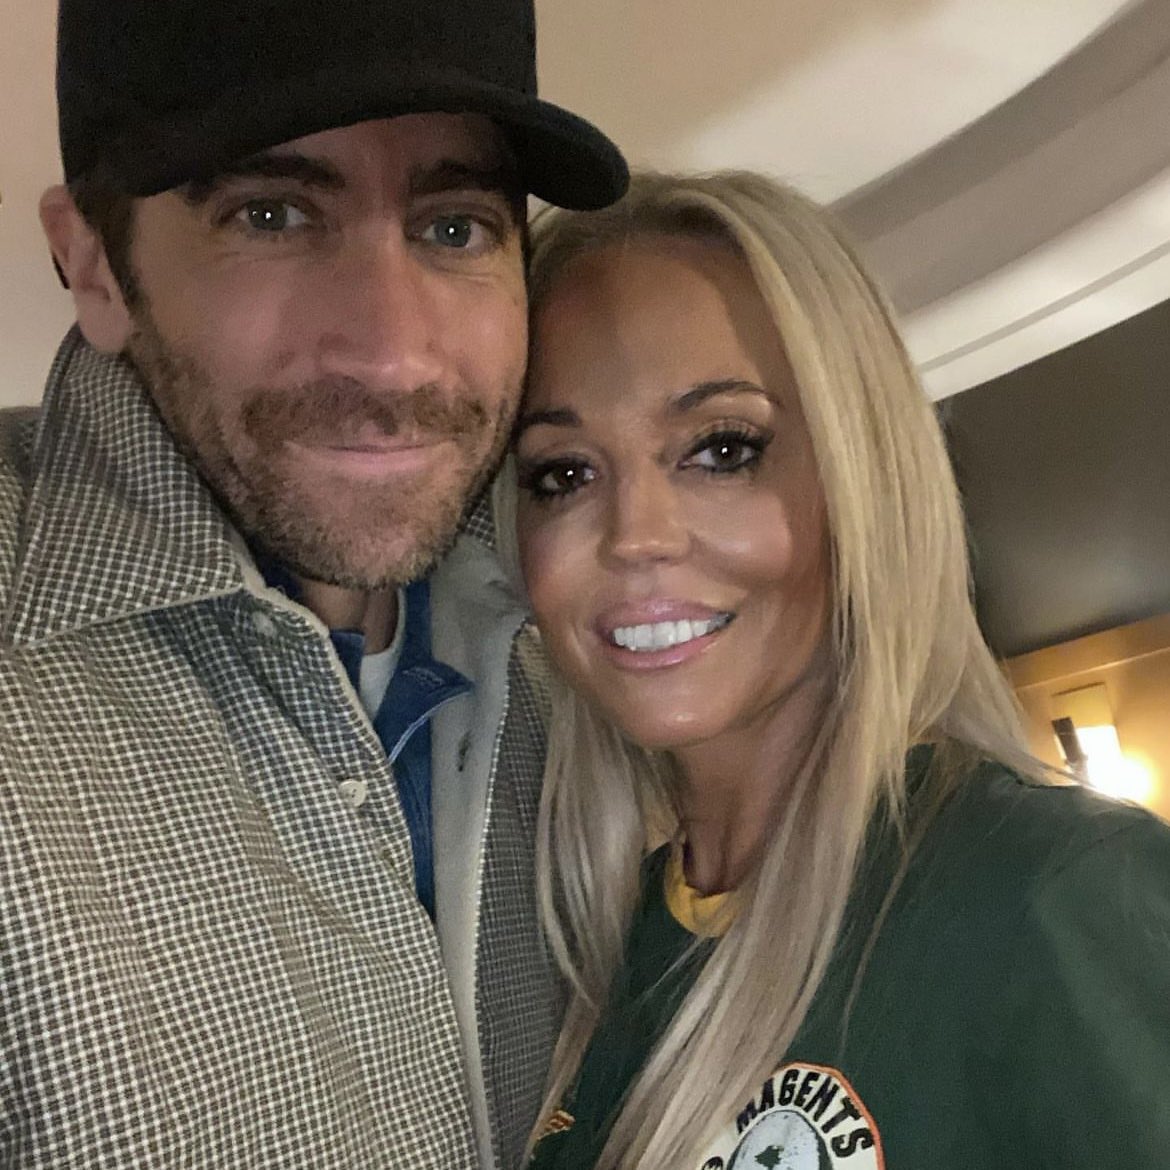 #JakeGyllenhaal #Paris2023 jake was in Paris having lunch with Rita Ora when he very kindly had his photo taken with a South African fan of his who was visiting Paris